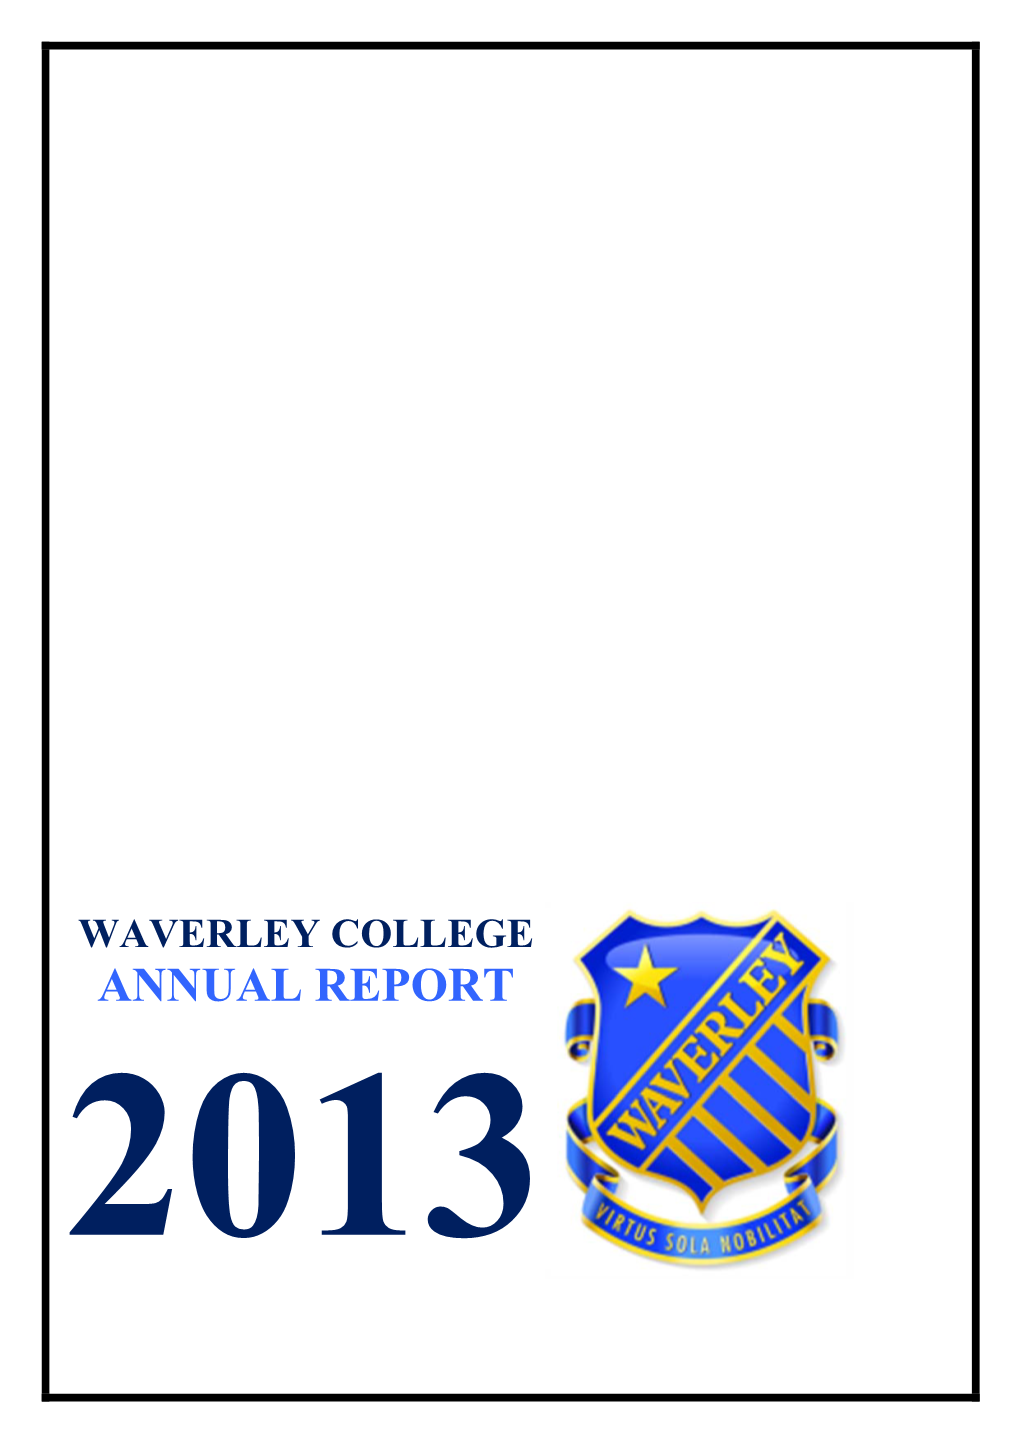 Waverley College Annual Report